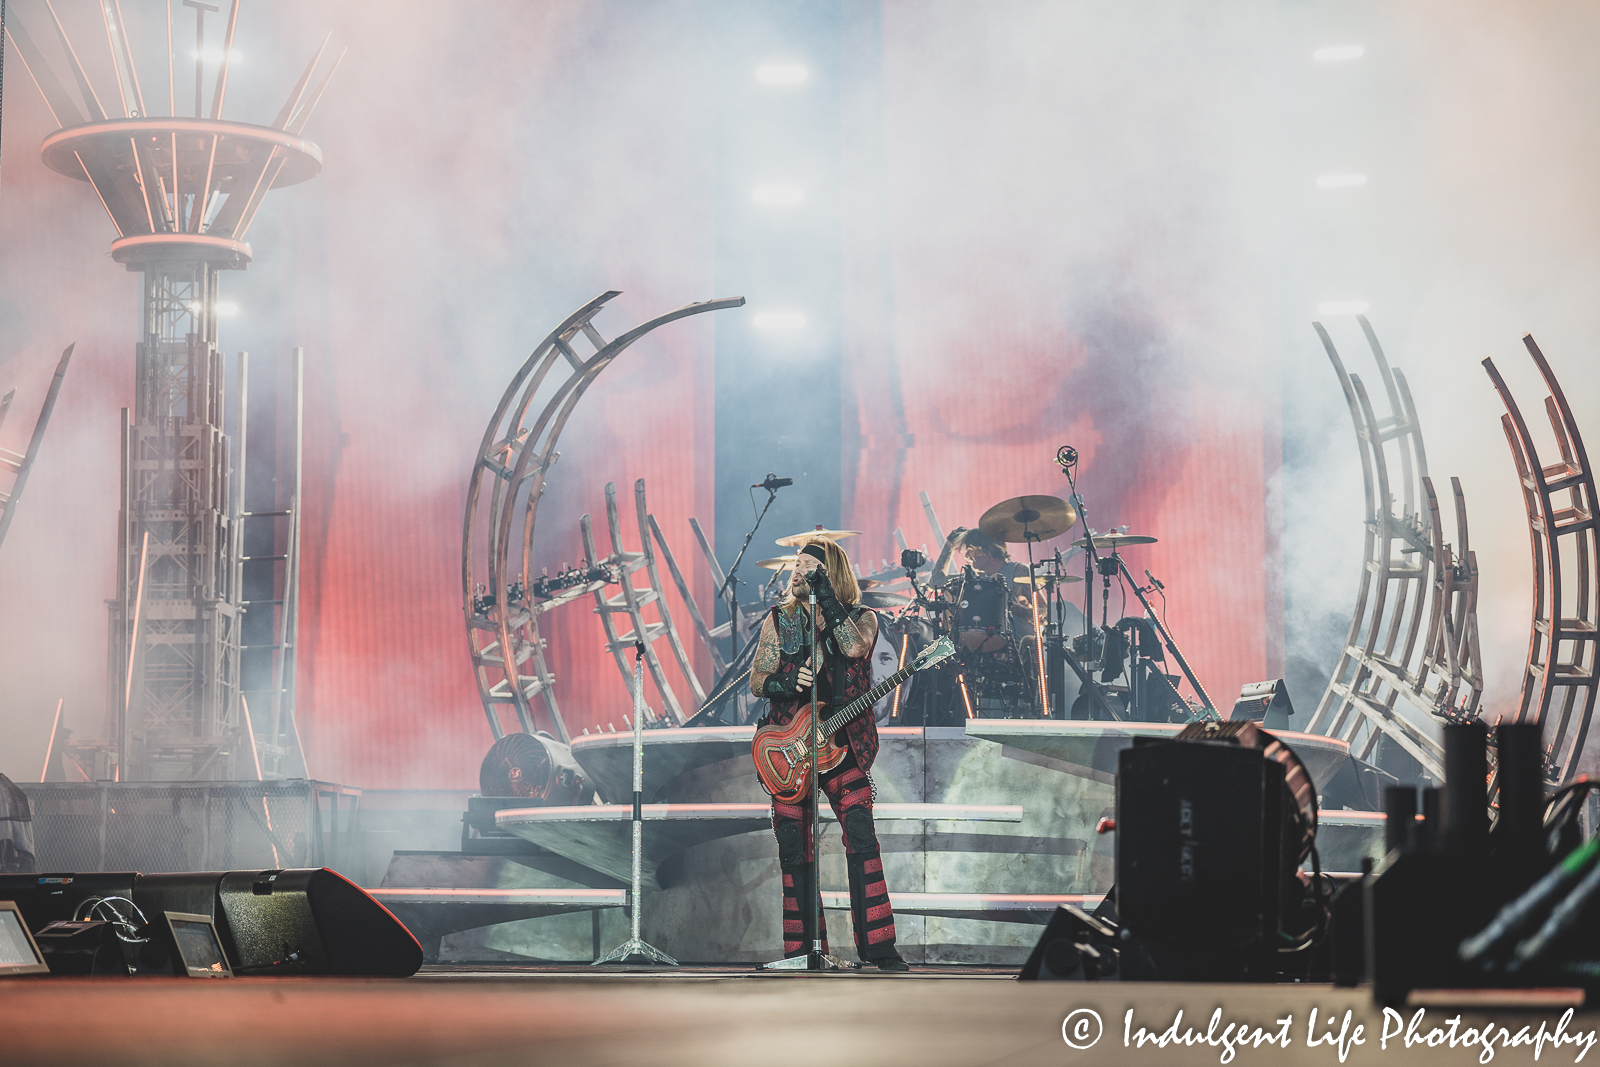 Mötley Crüe frontman Vince Neil performing live with drummer Tommy Lee during the band's concert at Kauffman Stadium in Kansas City, MO on July 19, 2022.